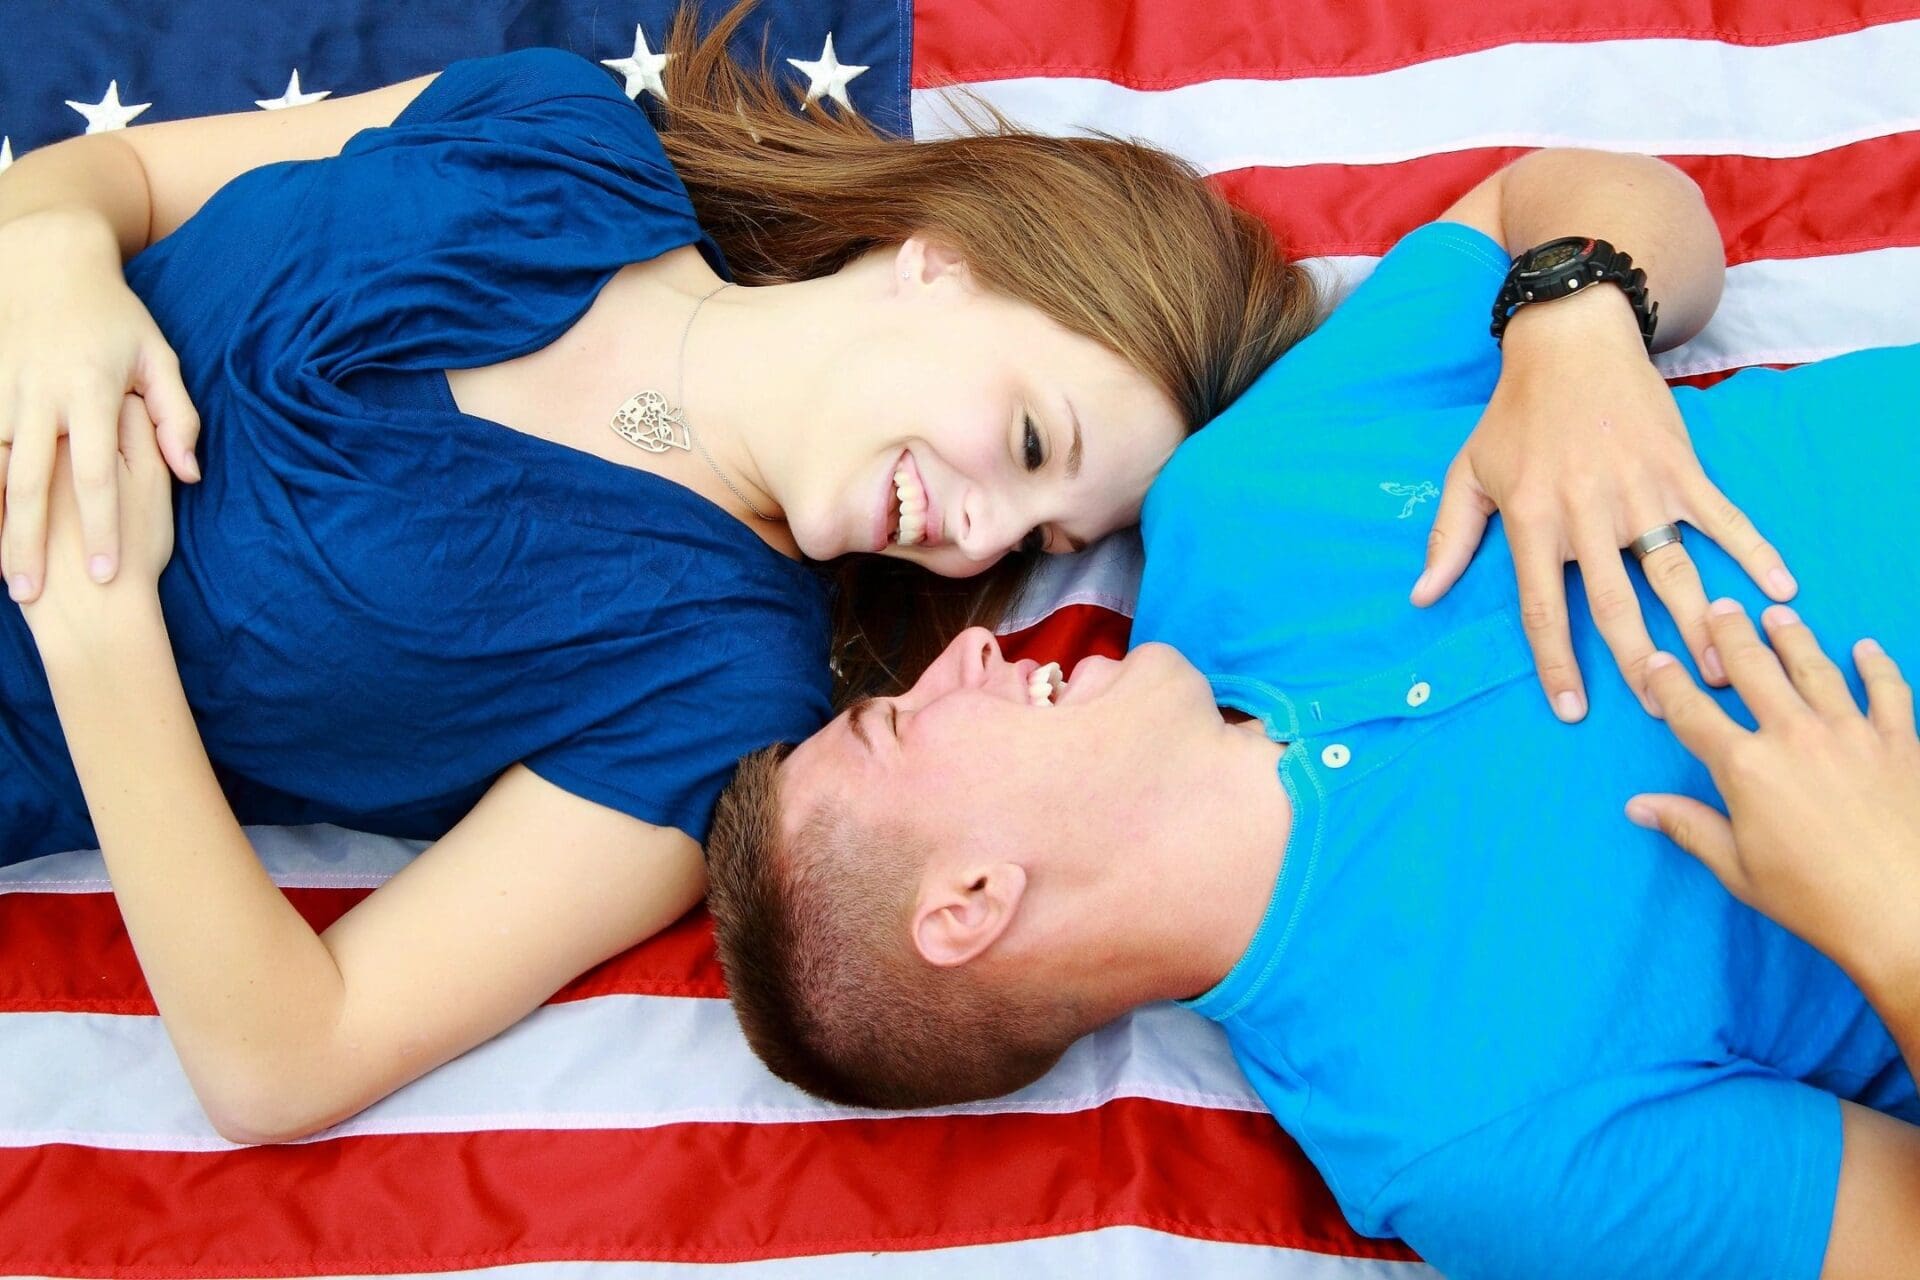 A man and woman laying on an american flag.